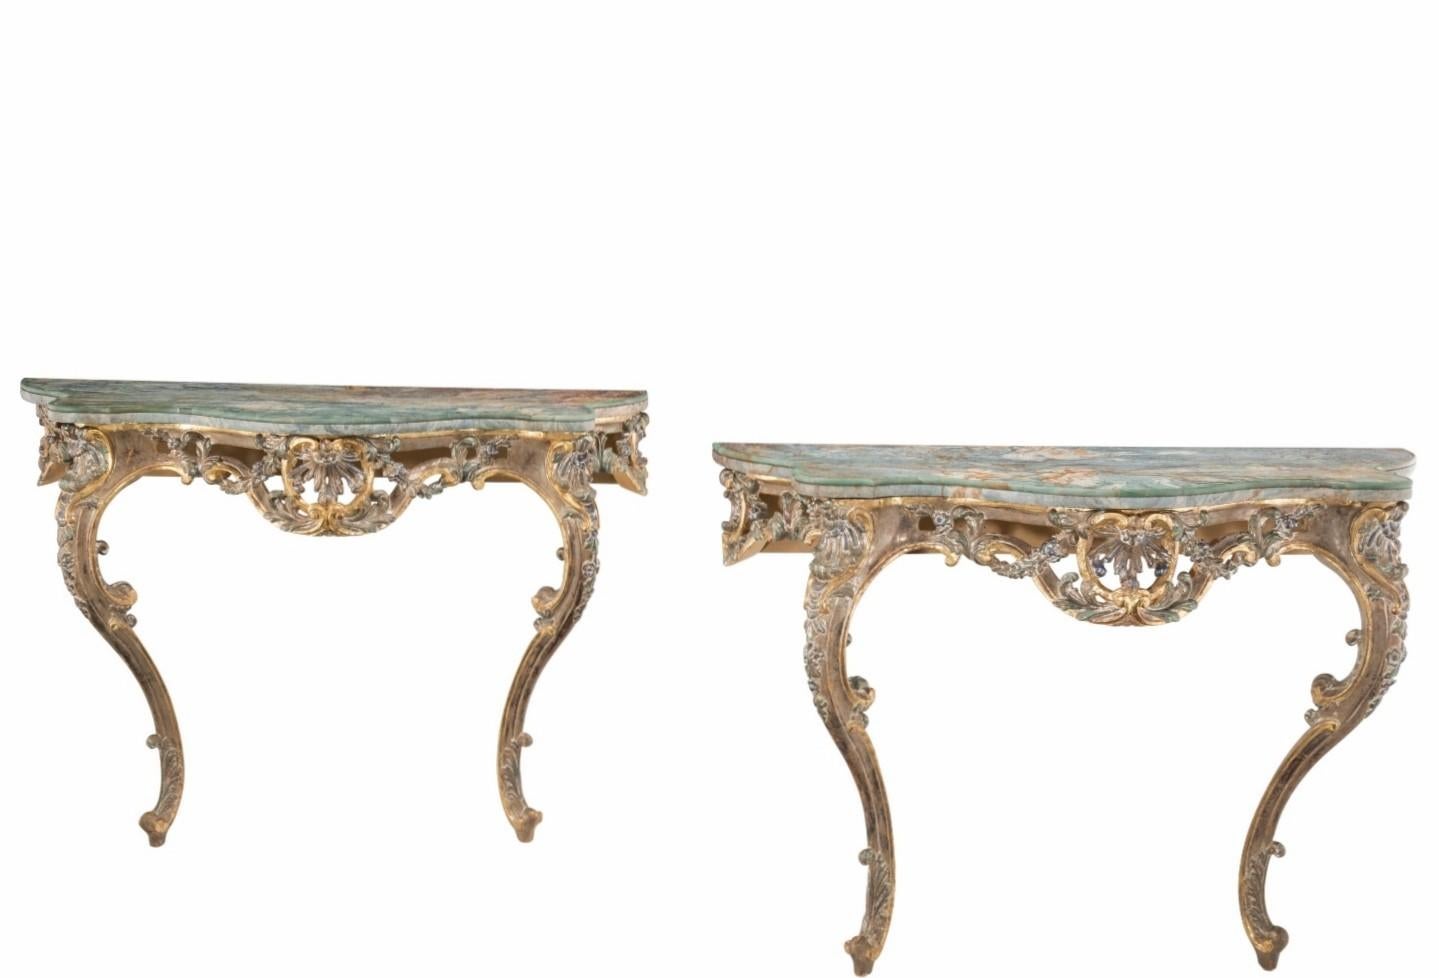 A pair of most impressive Italian hand carved polychrome painted parcel gilt wooden console tables with stunning original serpentine shaped polished Italian onyx dramatically veined marble tops.

Exquisitely hand-crafted in the early 20th century,